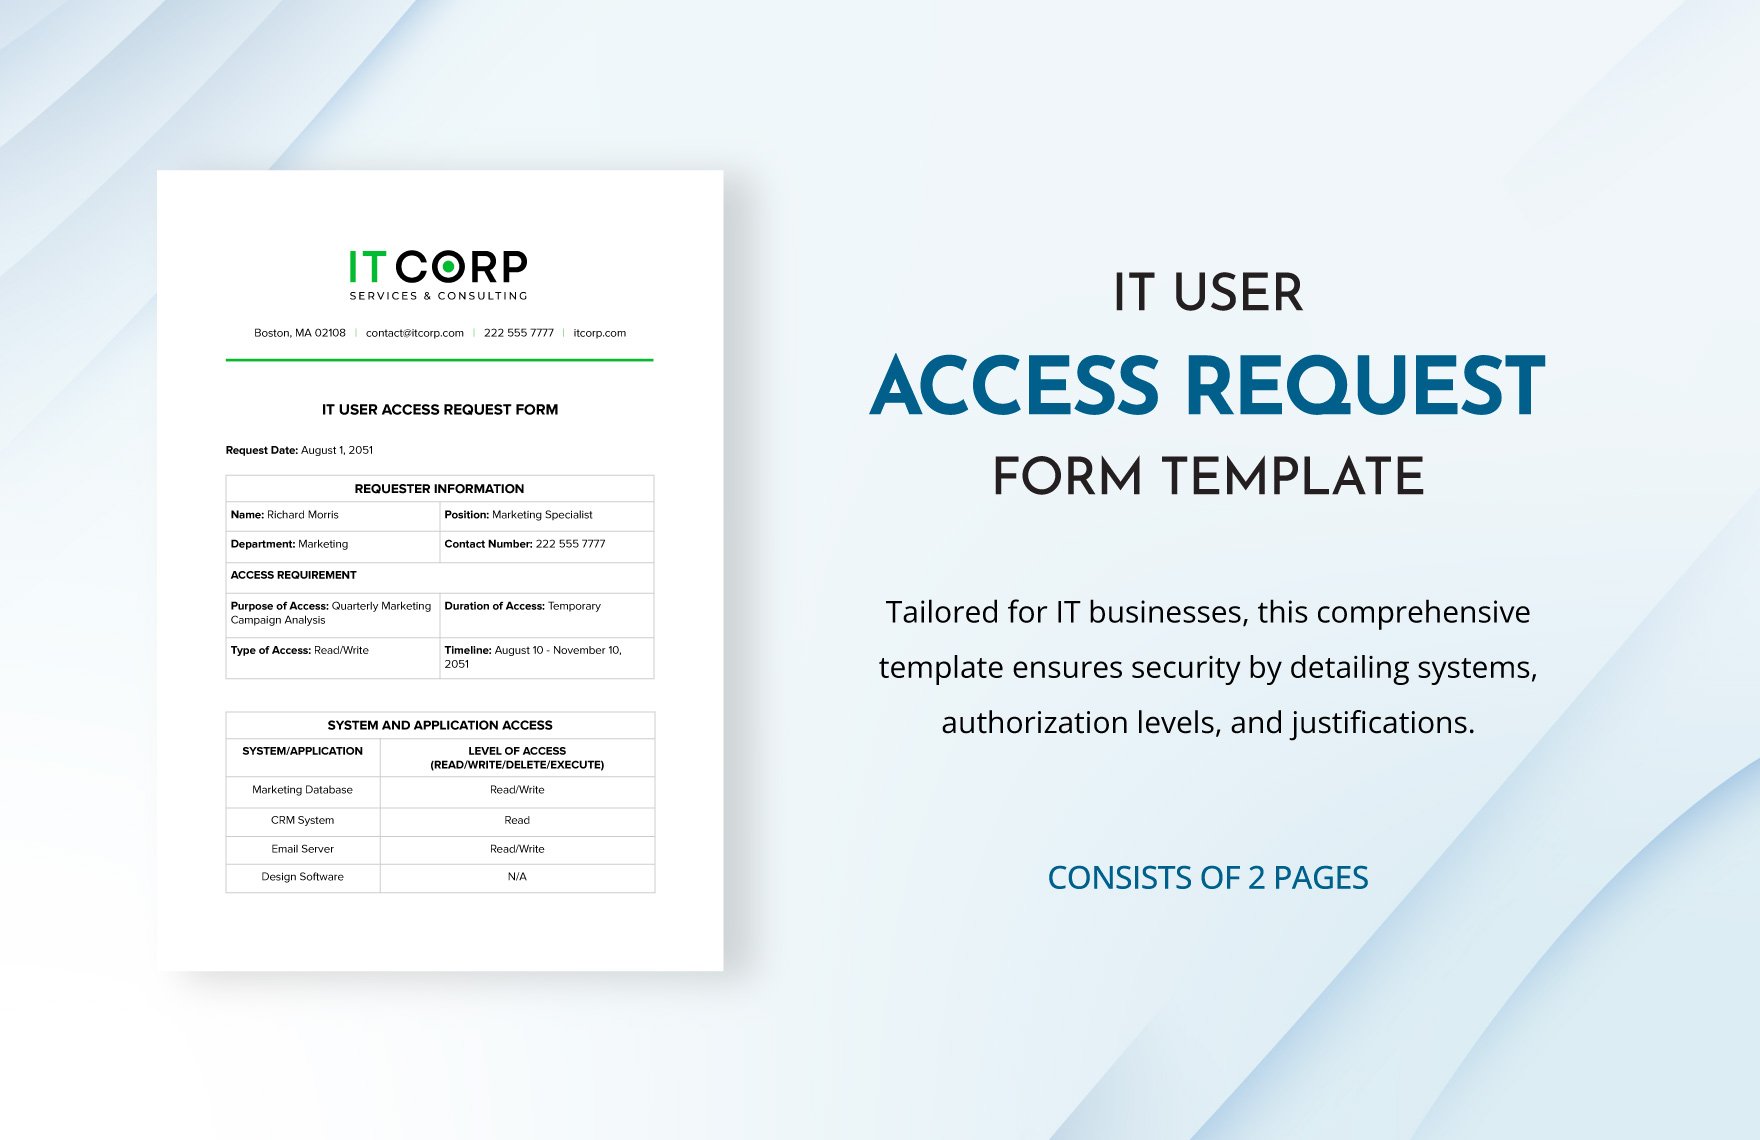 IT User Access Request Form Template